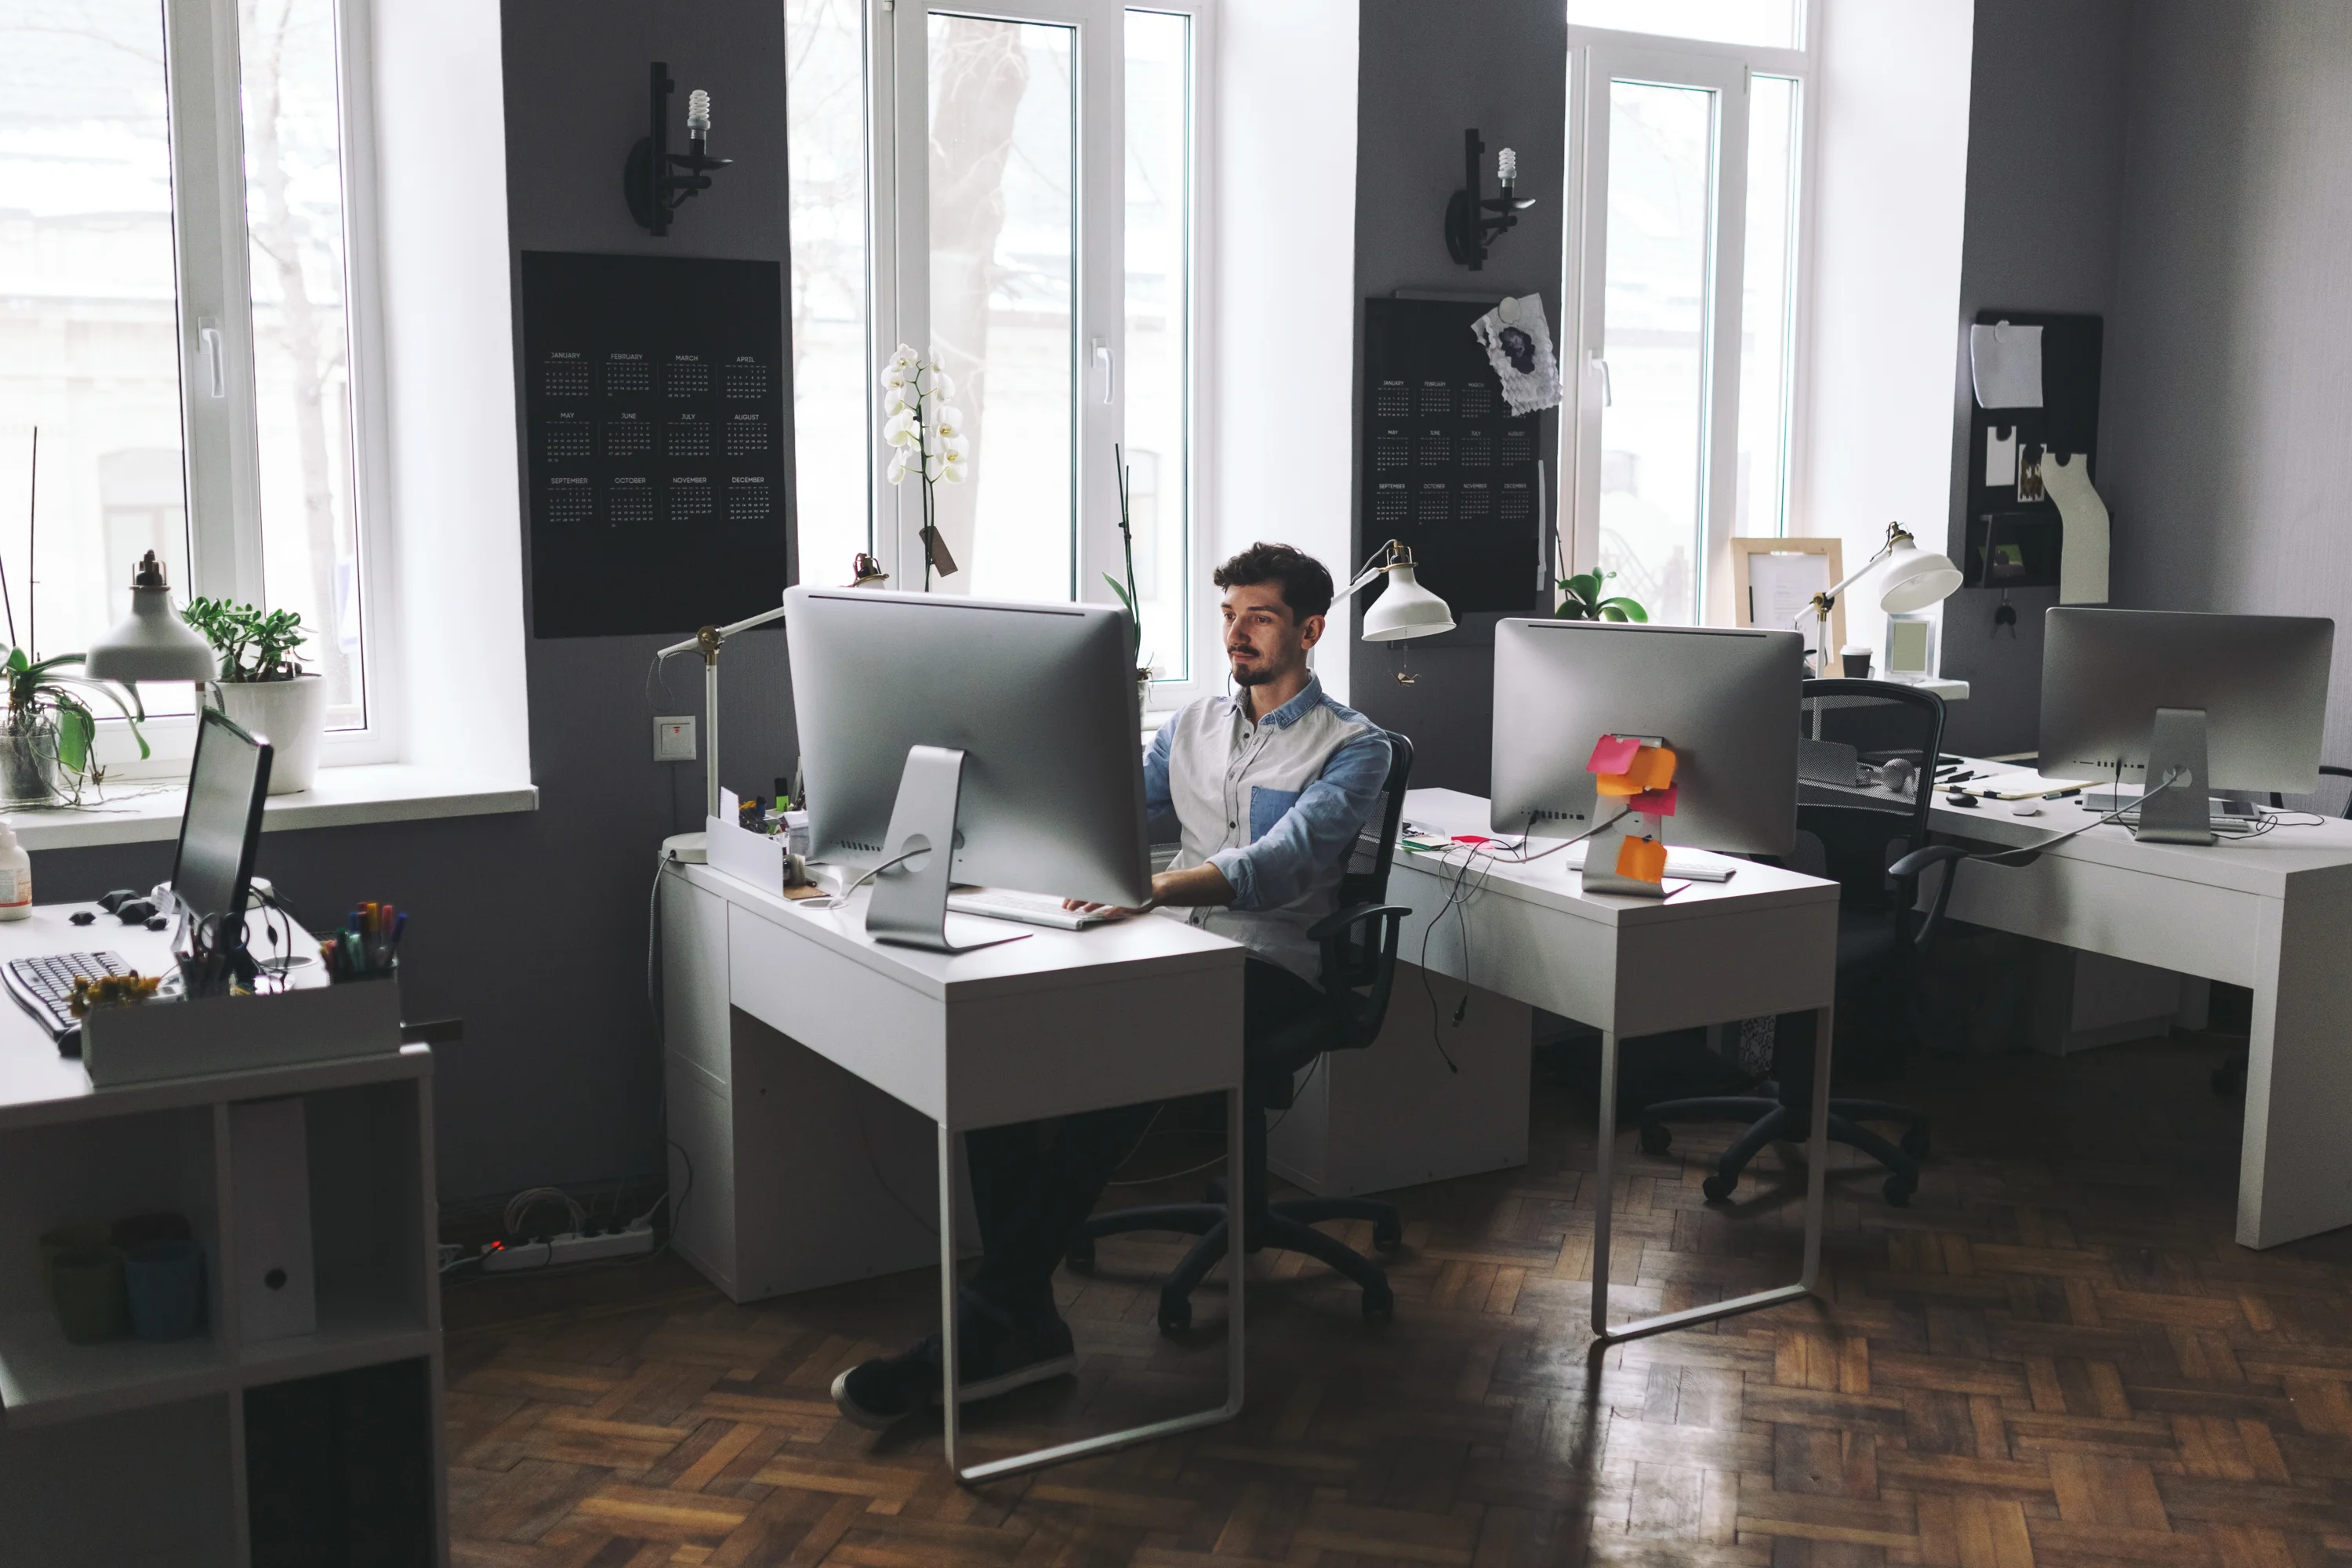 How Flexible Workspaces May Fulfil Both Present and Future Demands